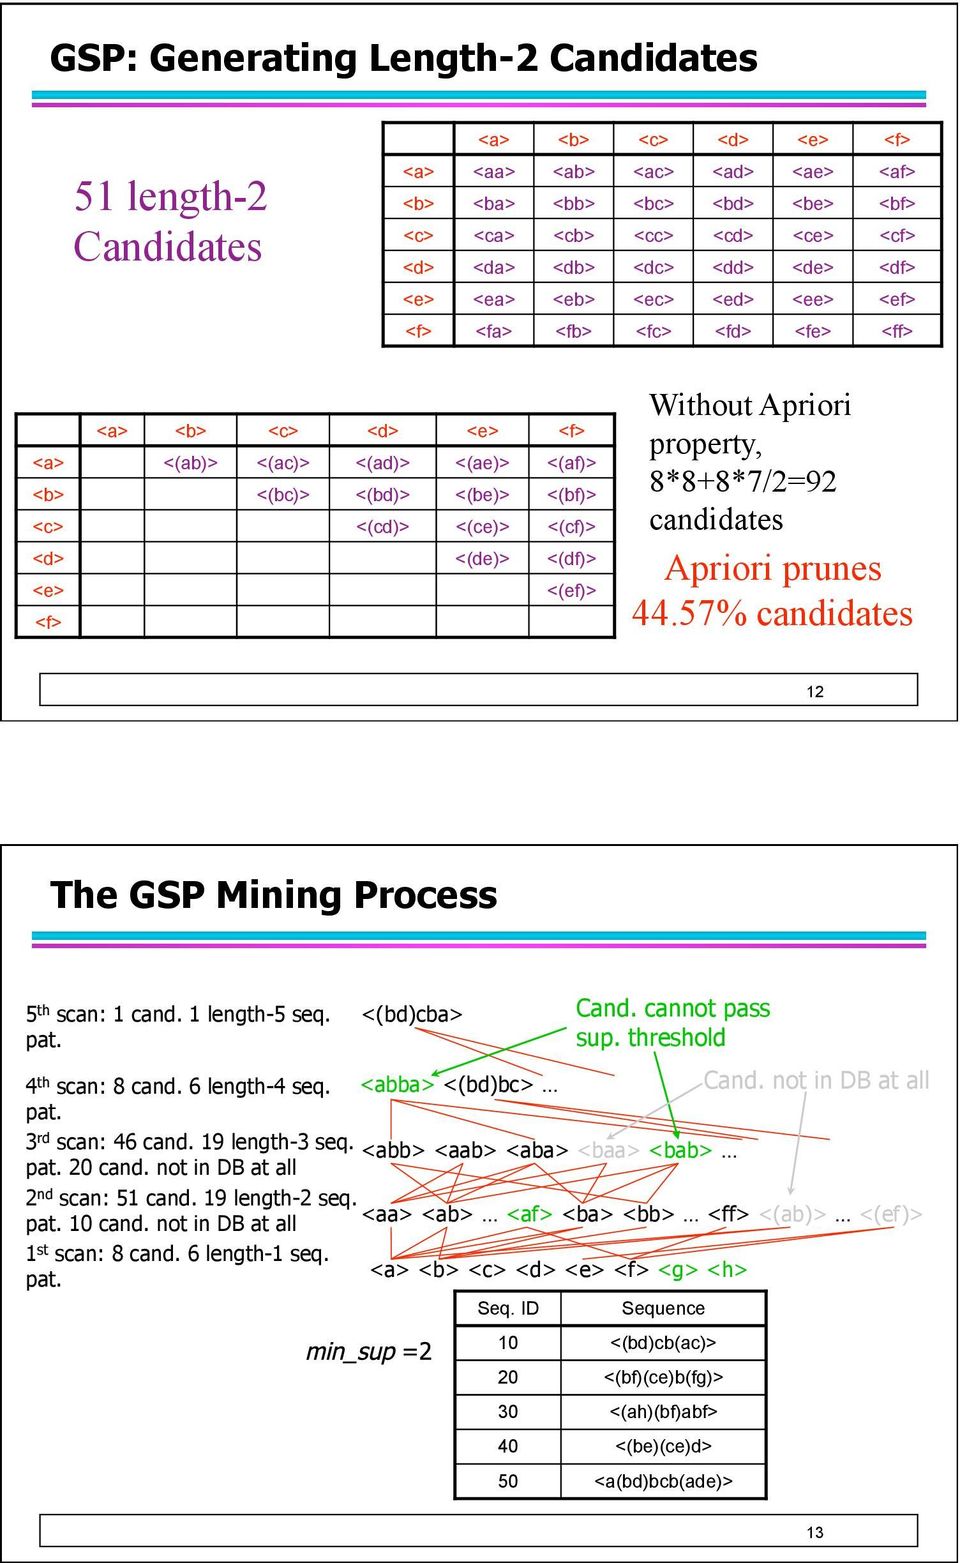 <(ce)> <(cf)> <d> <(de)> <(df)> <e> <(ef)> <f> Without Apriori property, 8*8+8*7/2=92 candidates Apriori prunes 44.57% candidates 12 The GSP Mining Process 5 th scan: 1 cand. 1 length-5 seq. pat.